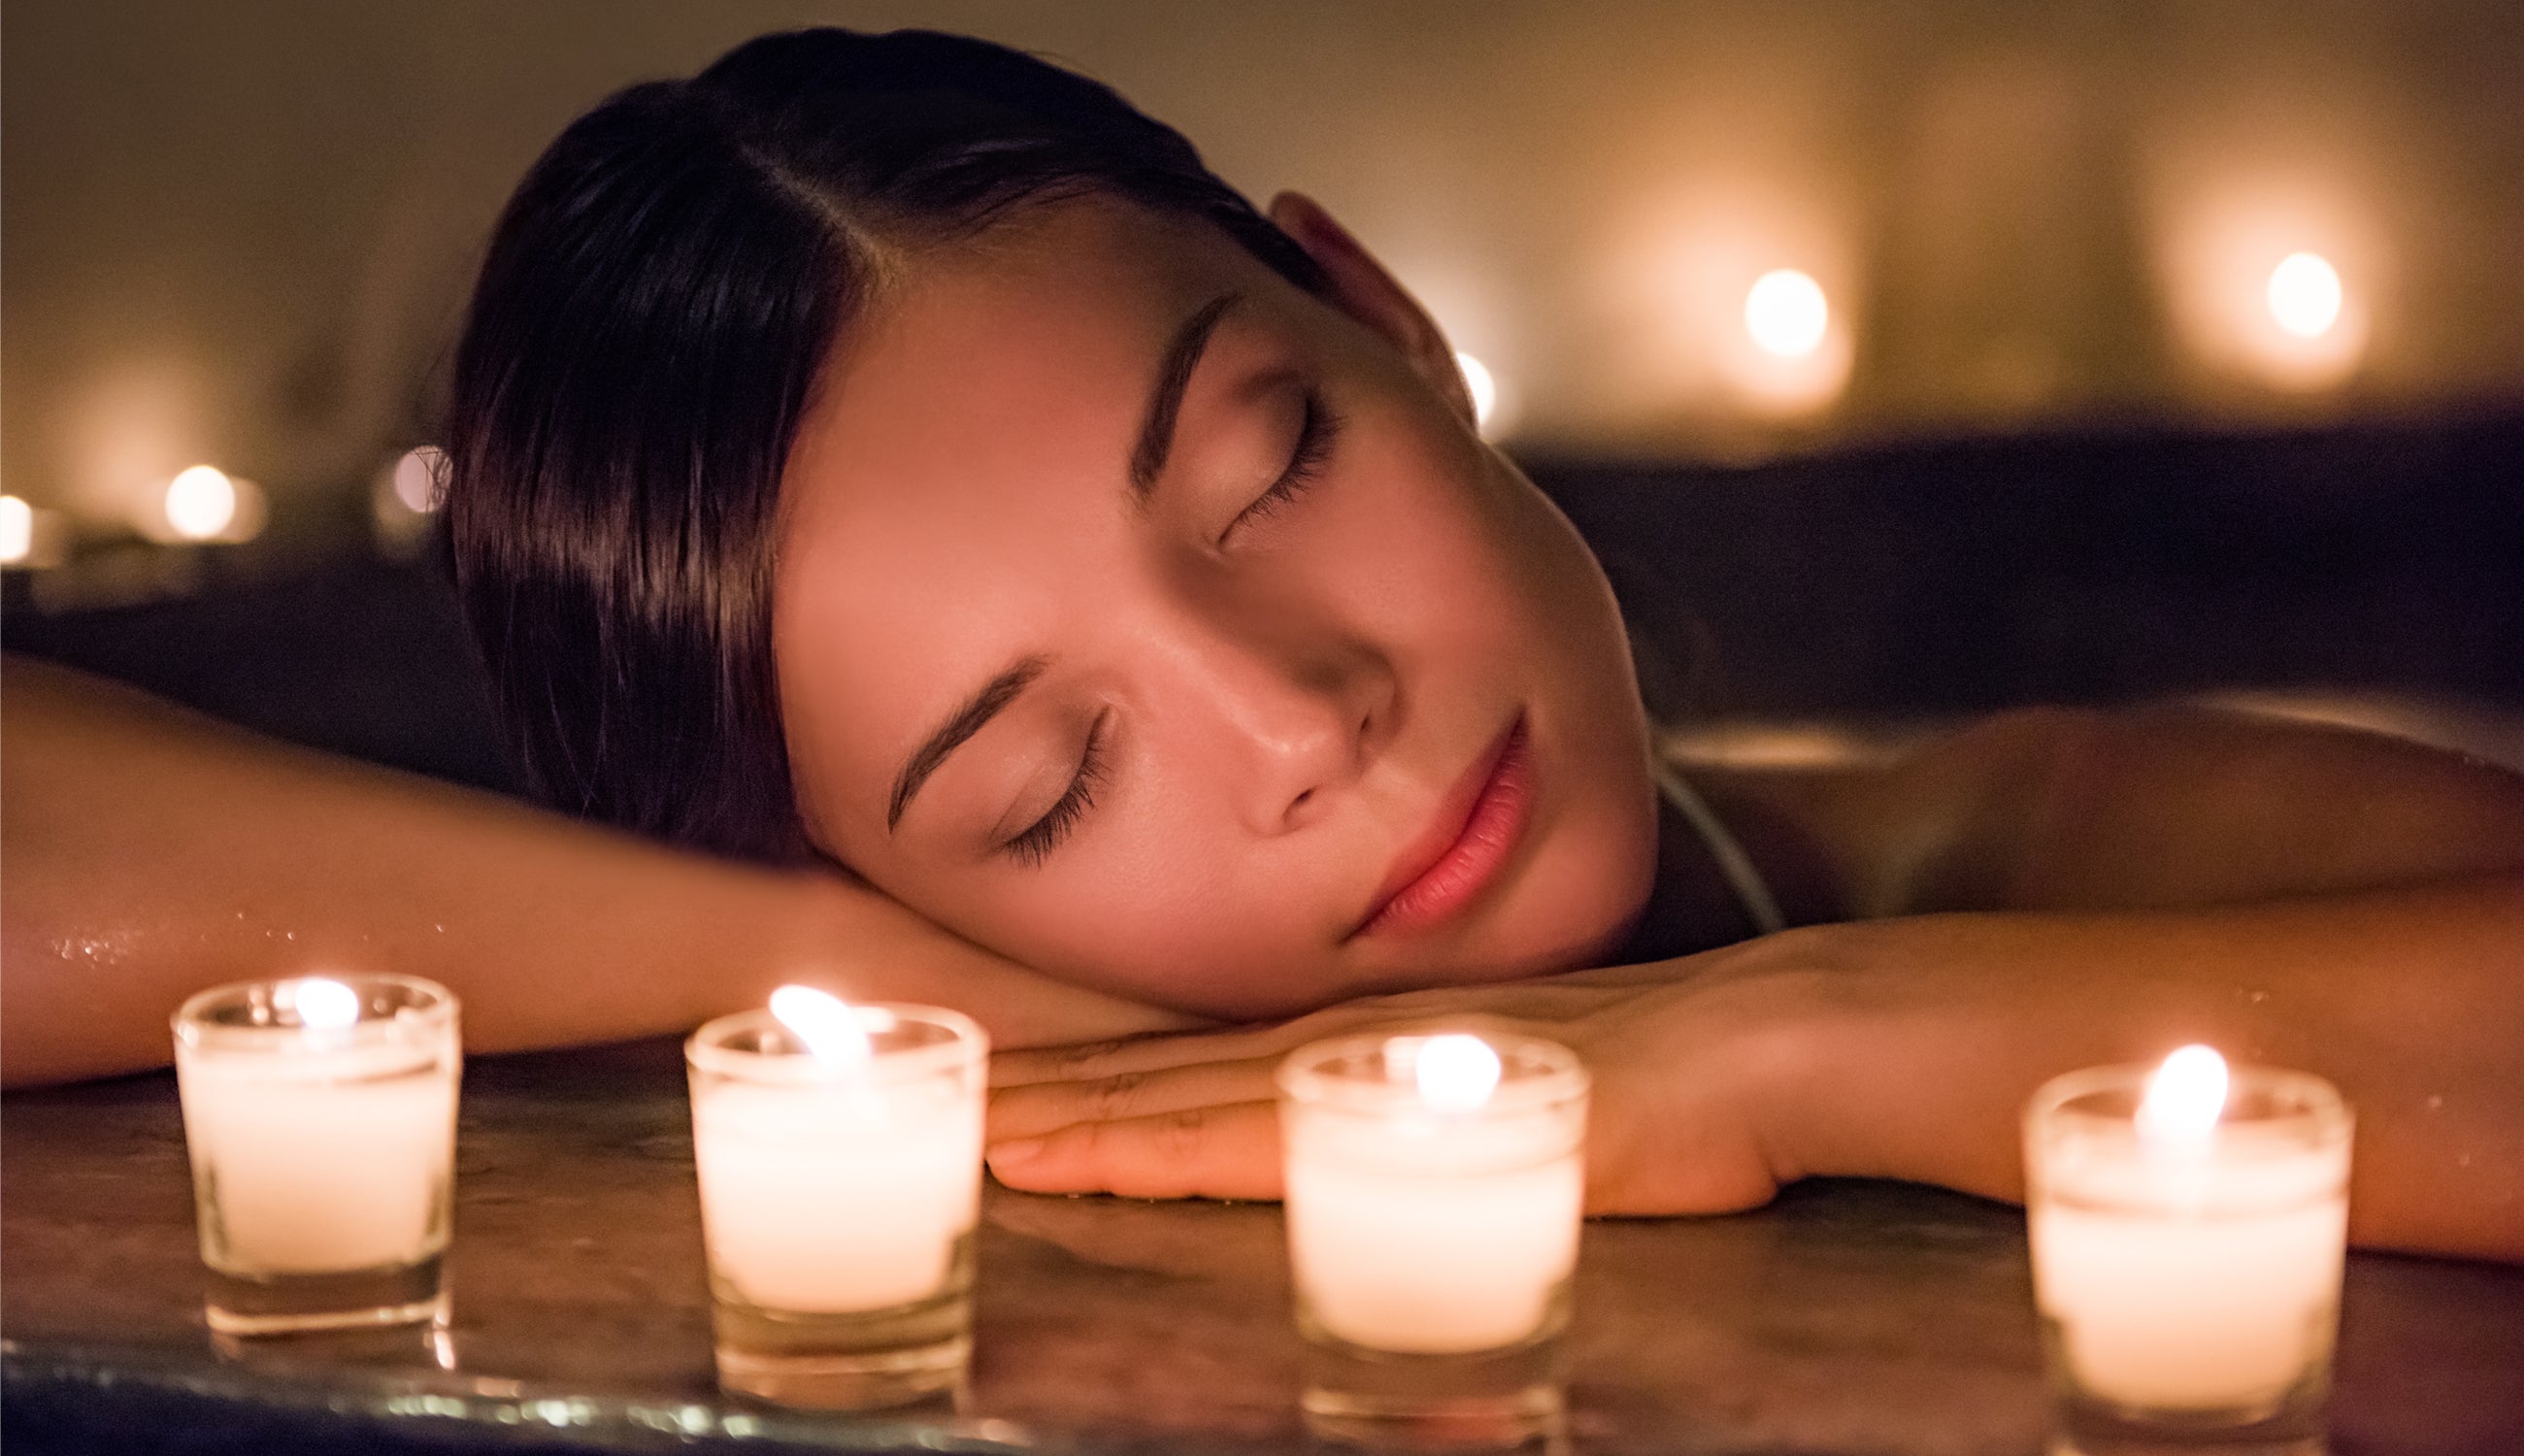 Woman relaxing with her eyes closed surrounded by lit candles